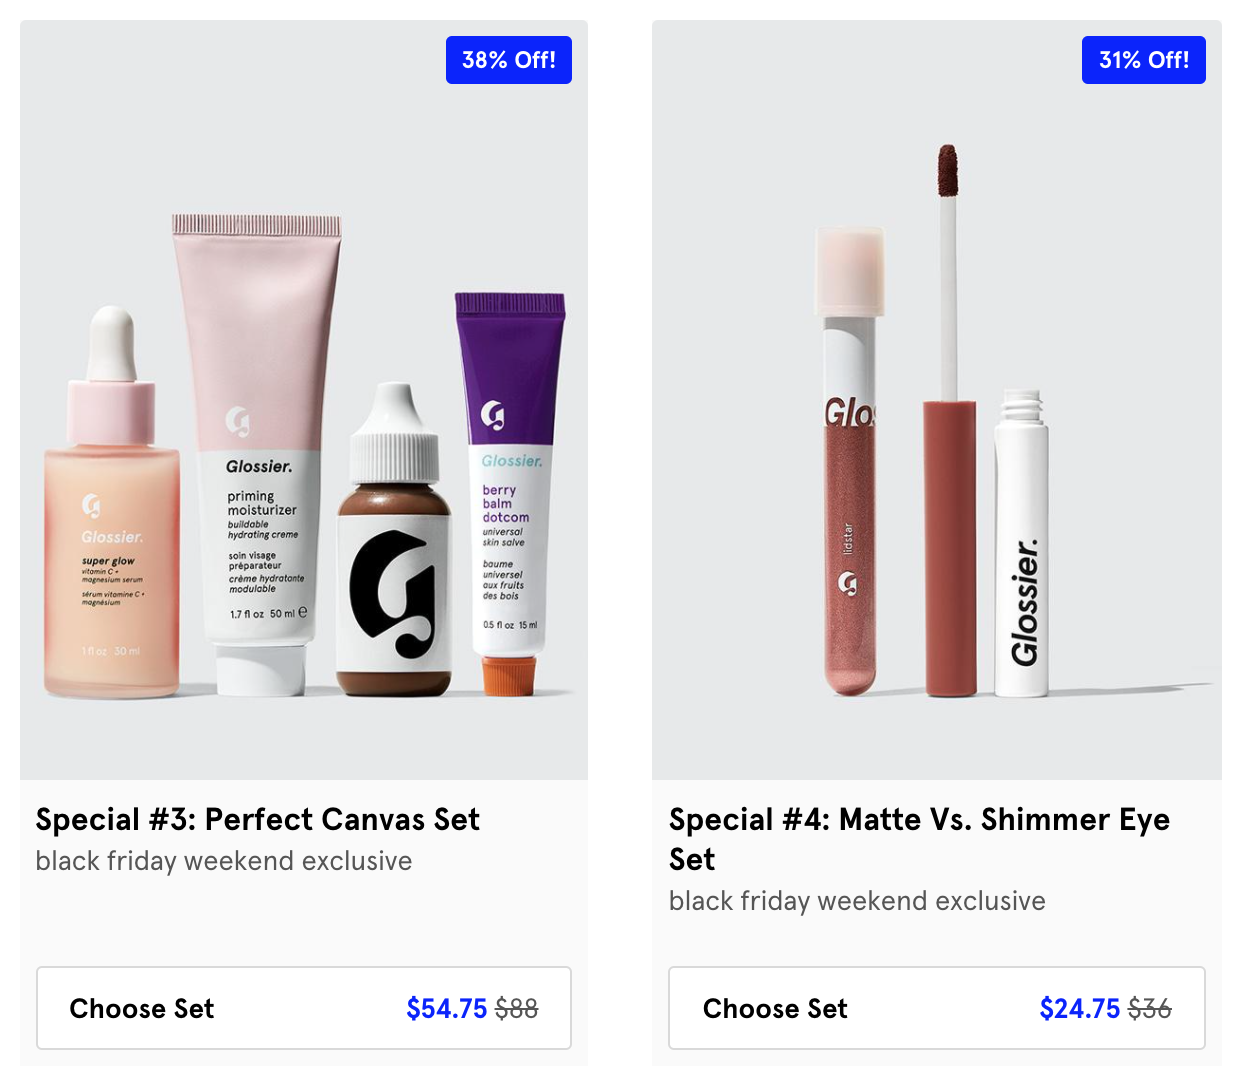 Ends Tonight! – Glossier Black Friday Deal – 25% to 35% Off! (Rare deal)